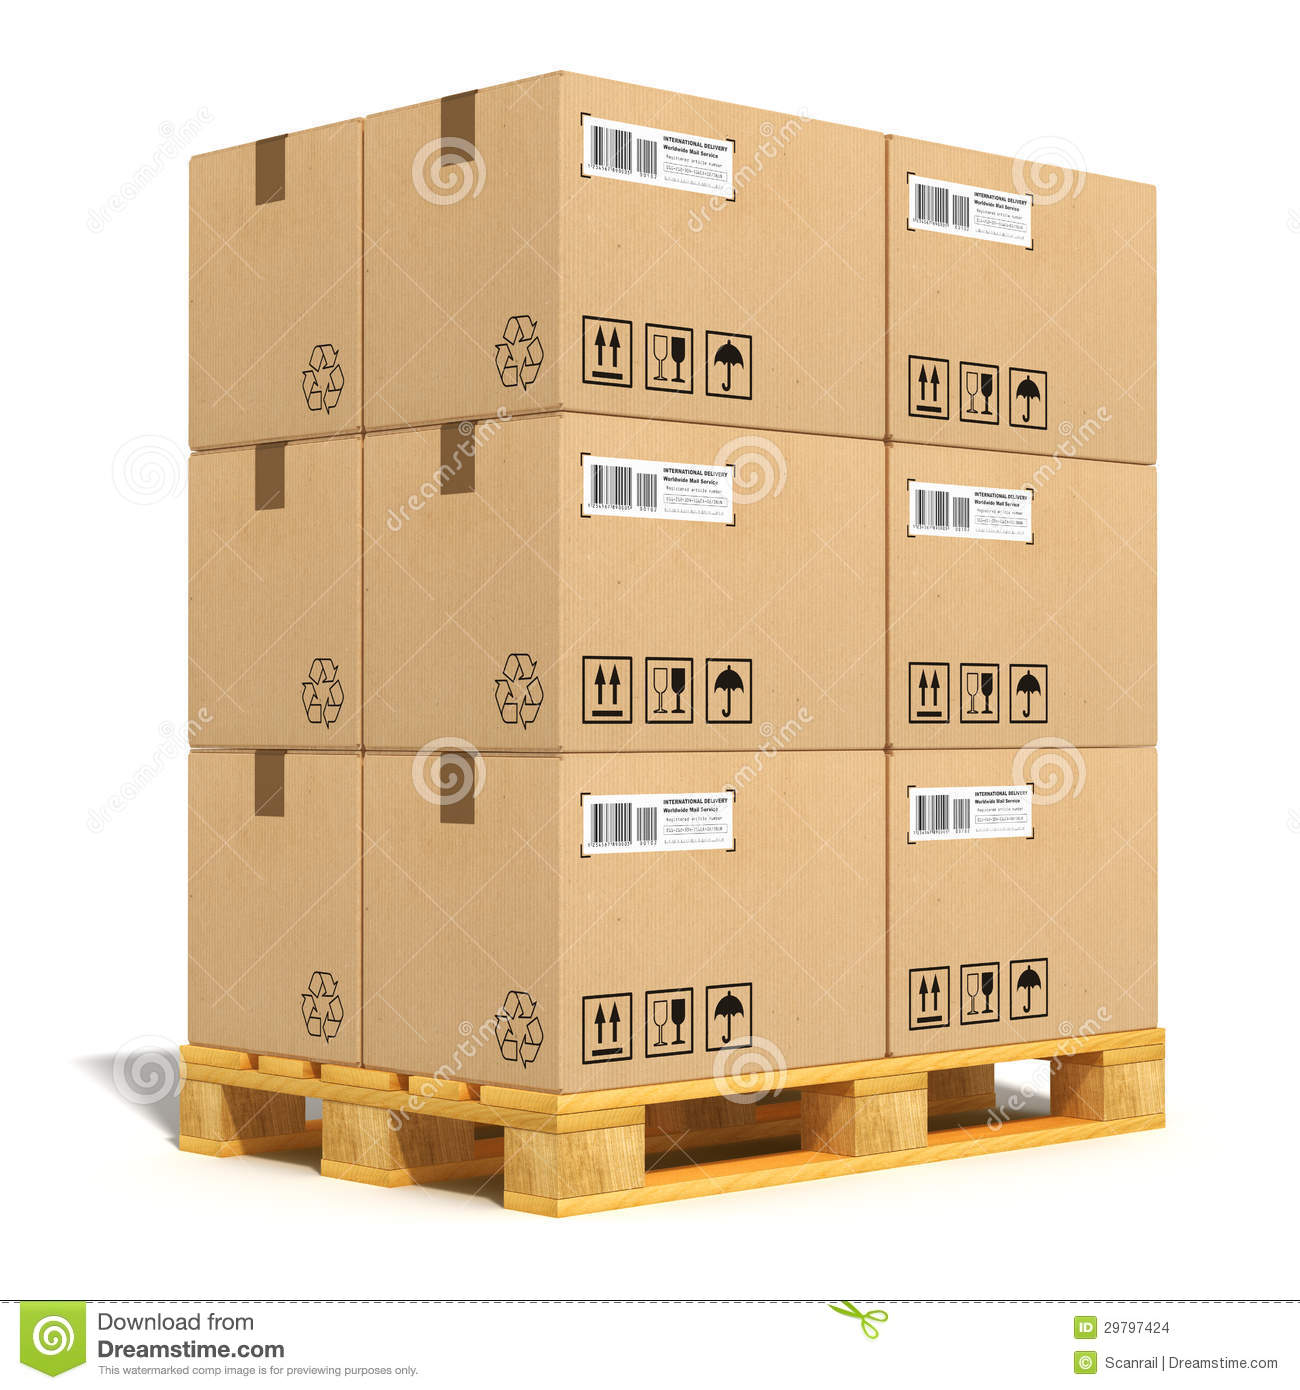 Cardboard Boxes On Shipping Pallet Stock Images   Image  29797424